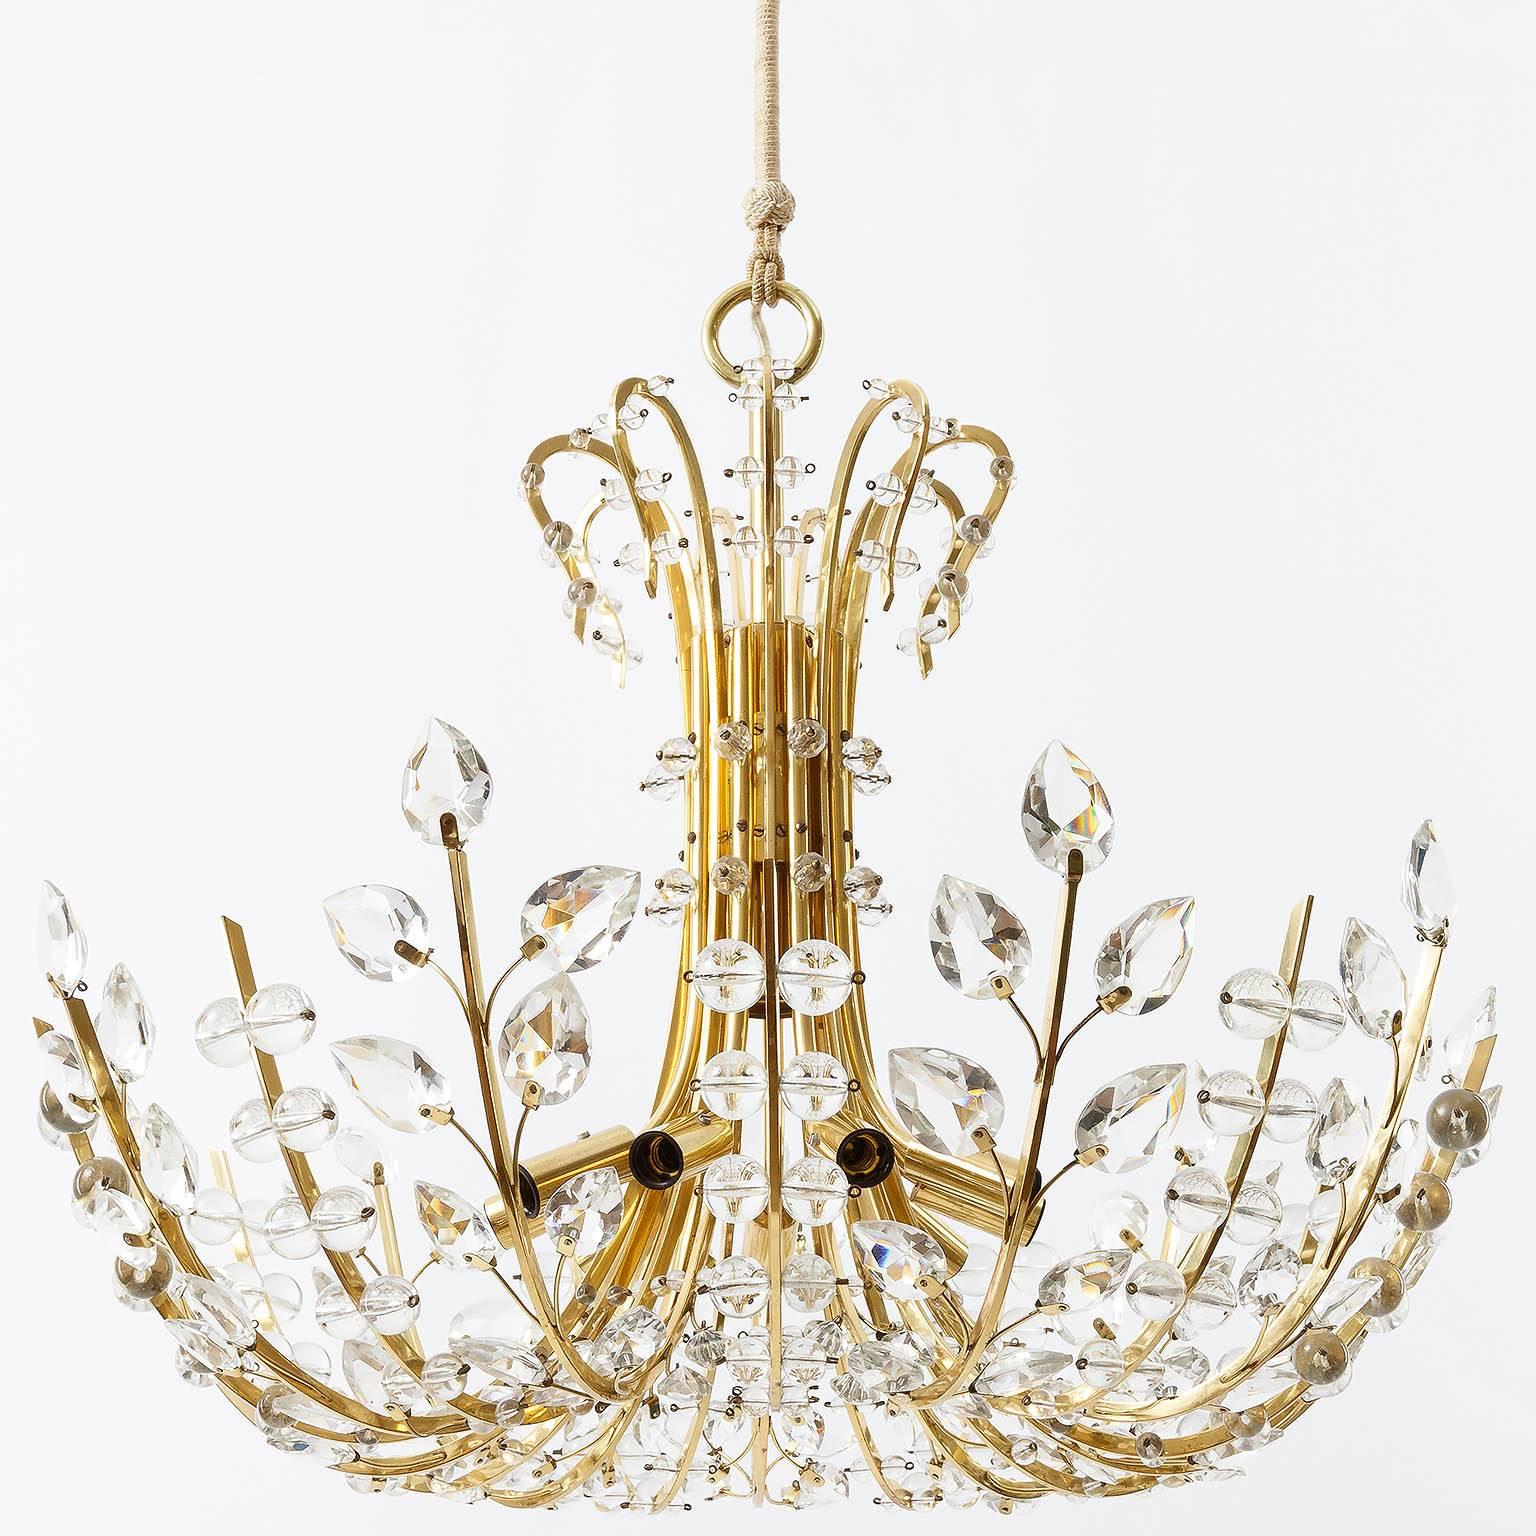 A fantastic and rare chandelier designed by Oswald Haerdtl in 1955 for J. & L. Lobmeyr, Vienna. 
The grace and loftiness of Haerdtls early works made him to one of the most important designers of his time. 
This light fixture was manufactured in